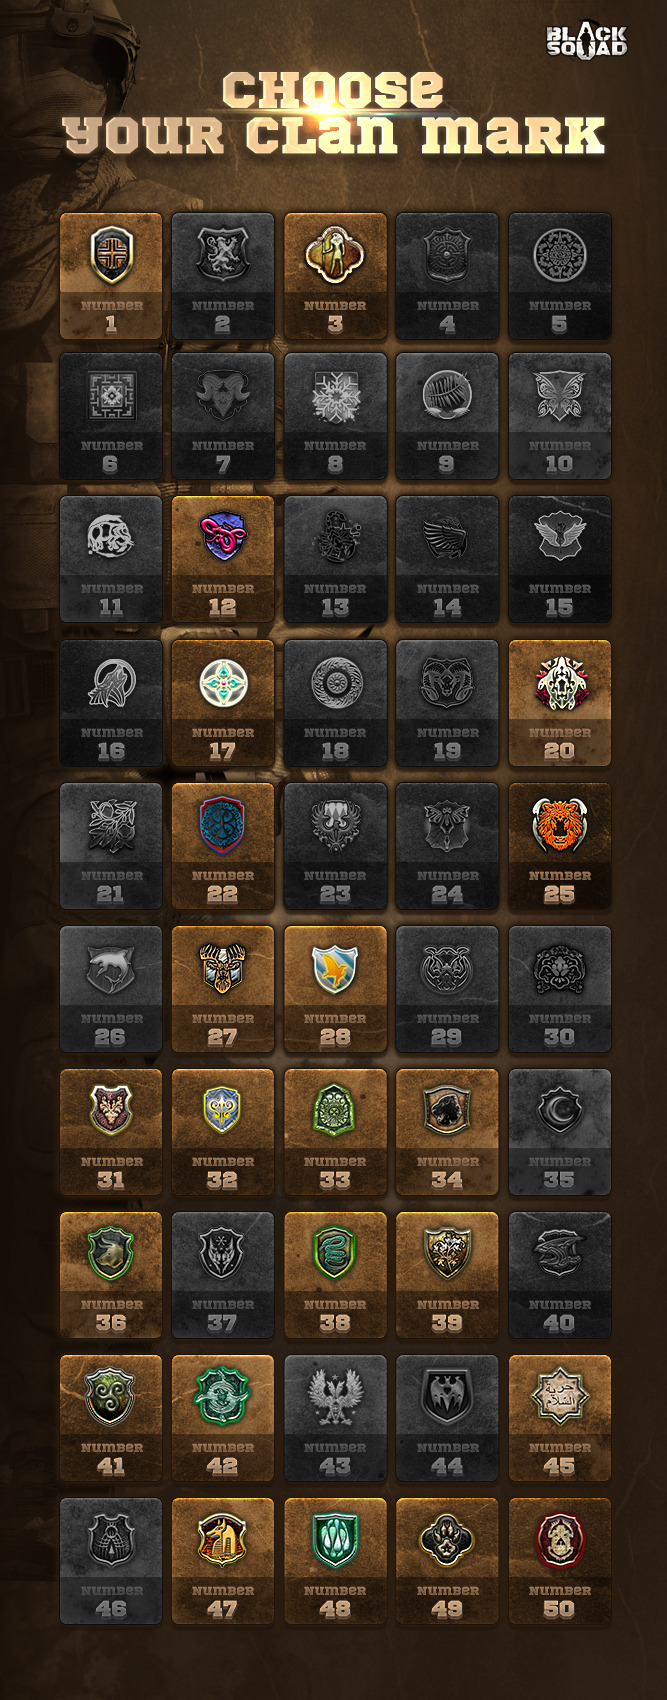 The ranks of the Clans